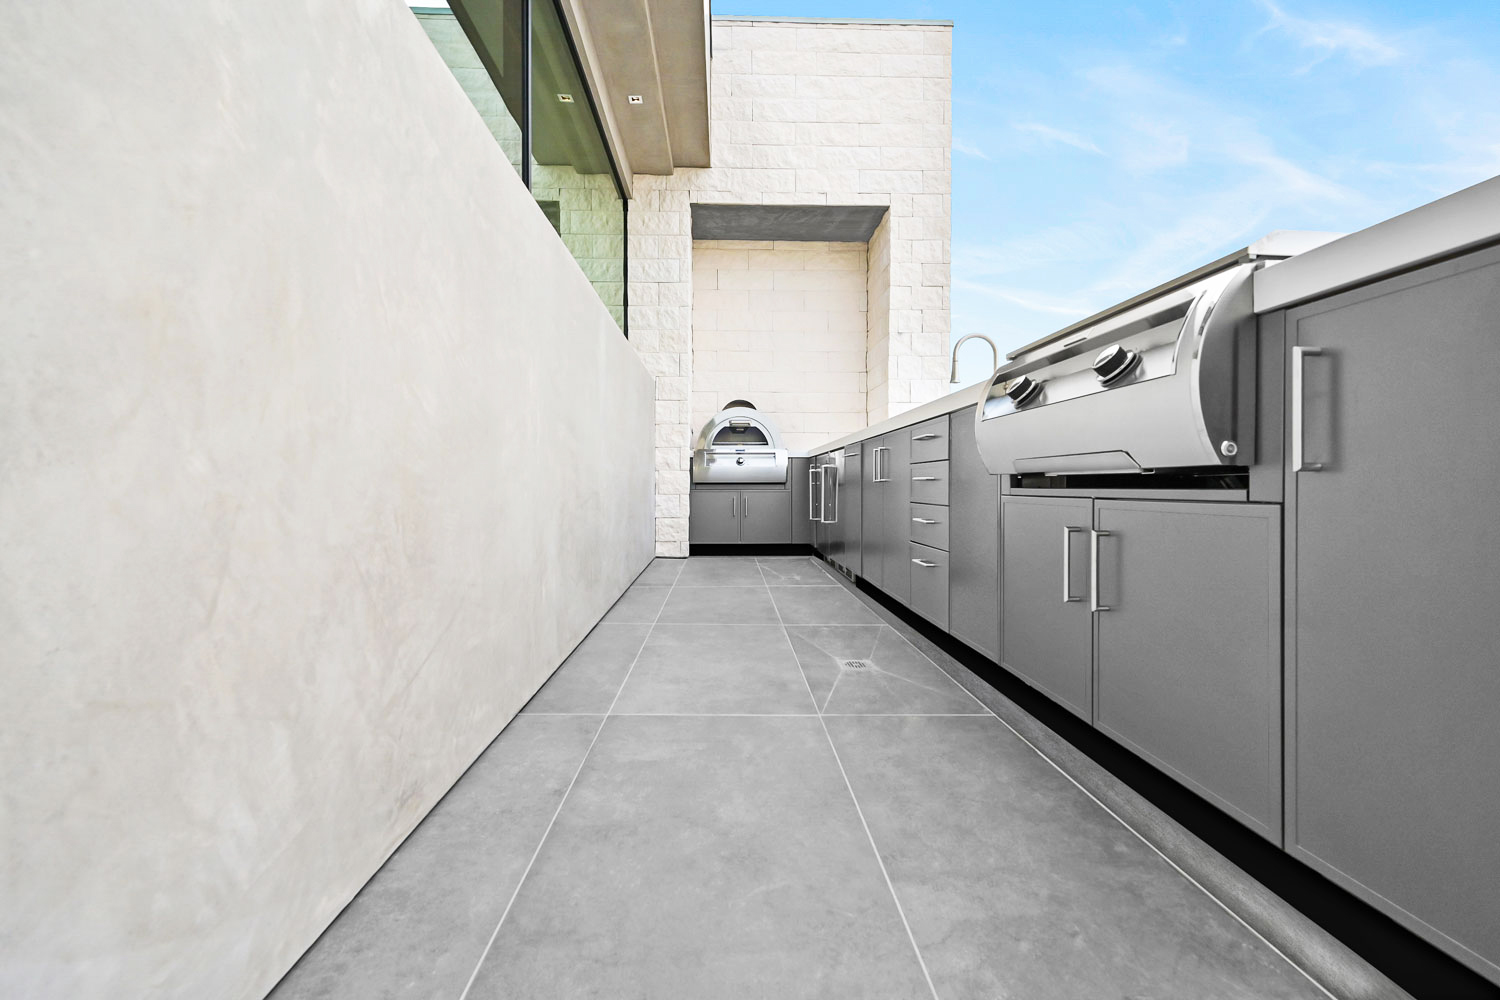 Integrating outdoor kitchens into your architecture projects